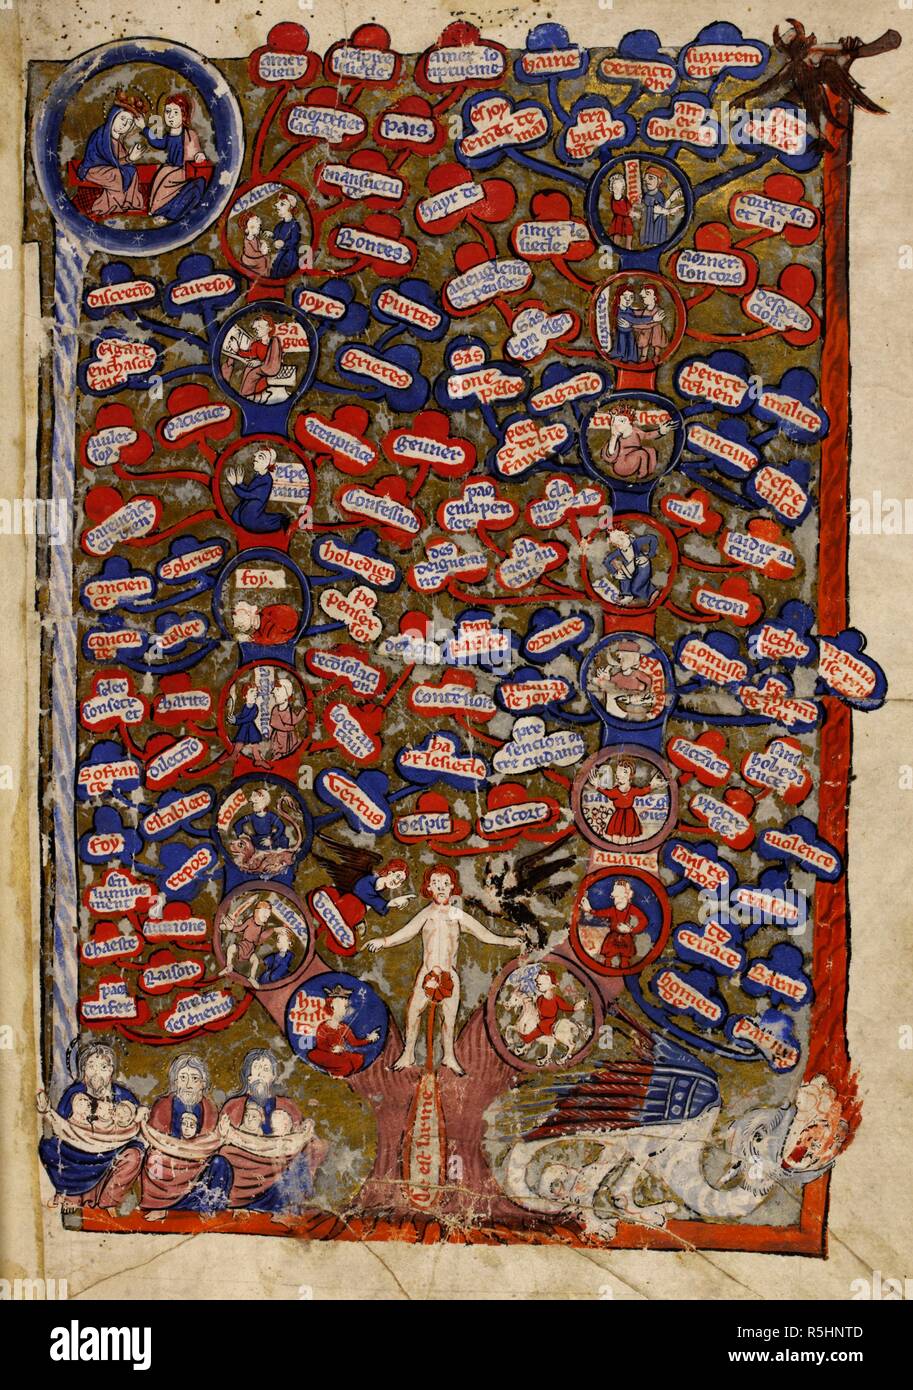 Tree of Virtues and Vices. Le livre du TrÃ©sor. Late 13th century. Source: Add. 30024, f.2. Language: French. Author: LATINI, BRUNETTO. Stock Photo